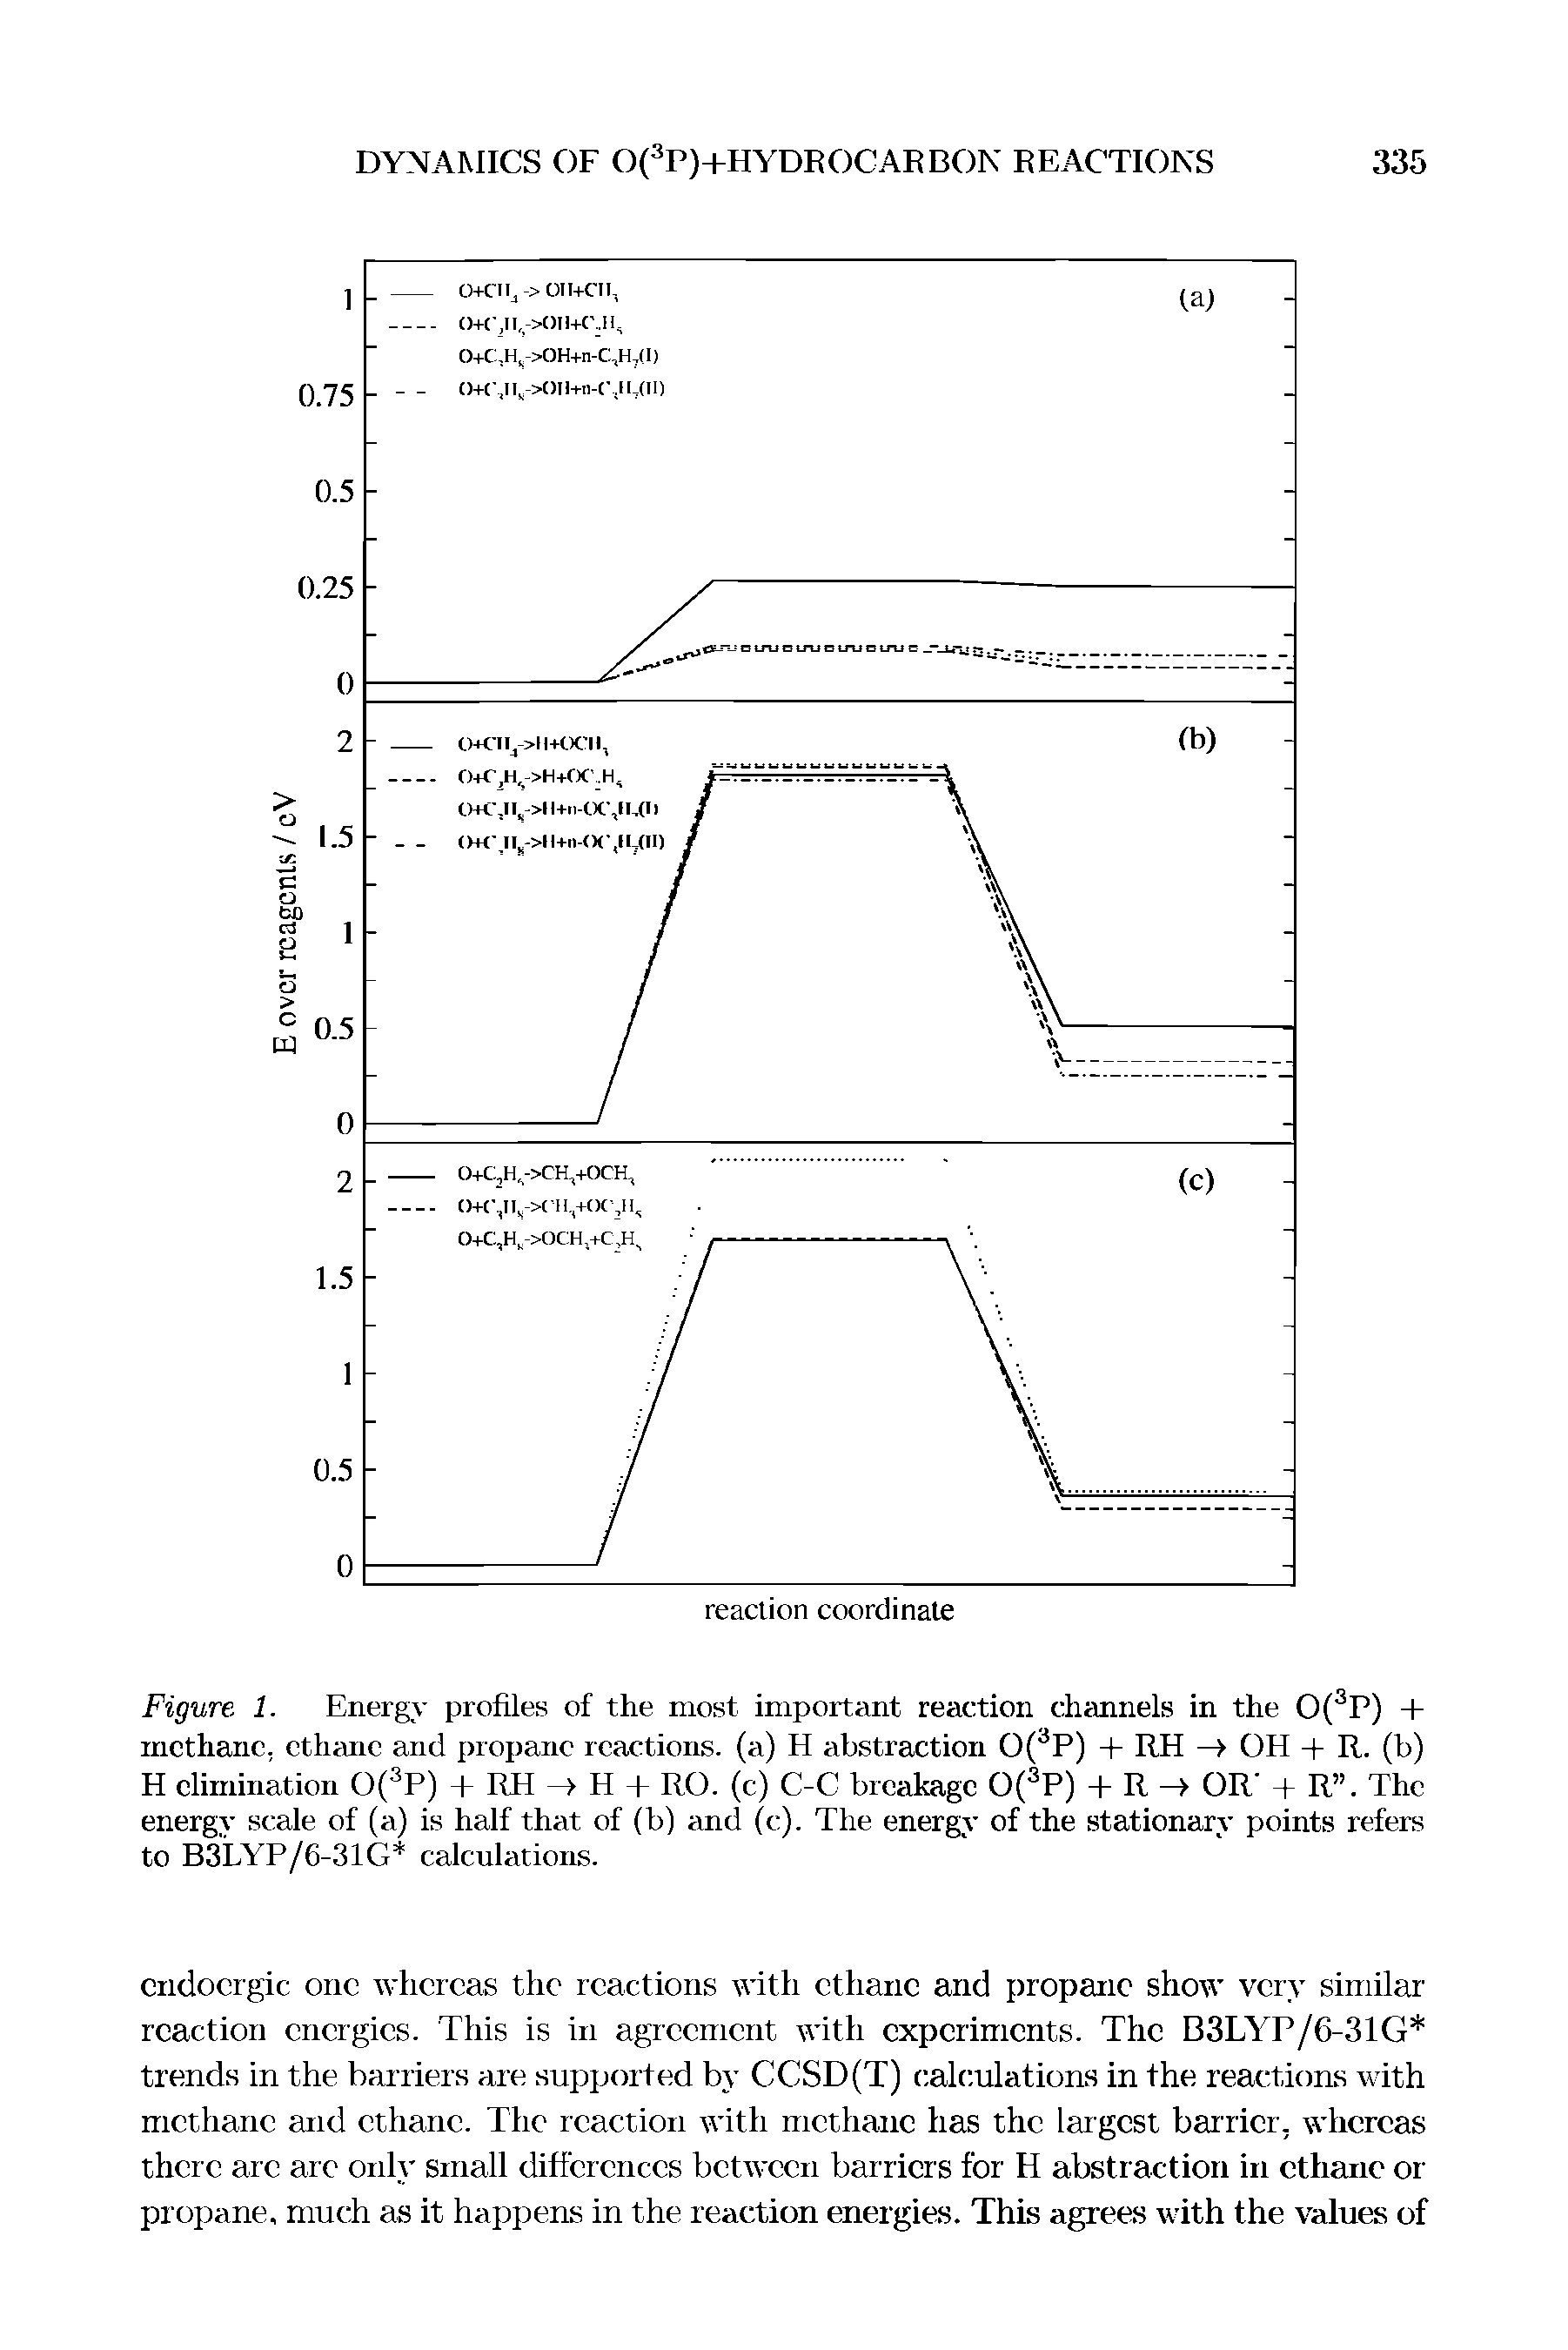 Figure 1. Energy profiles of the most important reaction channels in the 0( P) + methane, ethane and propane reactions, (a) H abstraction 0( P) + RH —> OH + R. (b) H elimination 0( P) + RH -> H + RO. (c) C-C breakage 0( P) + R OR + R . The energy scale of (a) is half that of (b) and (c). The energy of the stationary points refers to B3LYP/6-31G calculations.